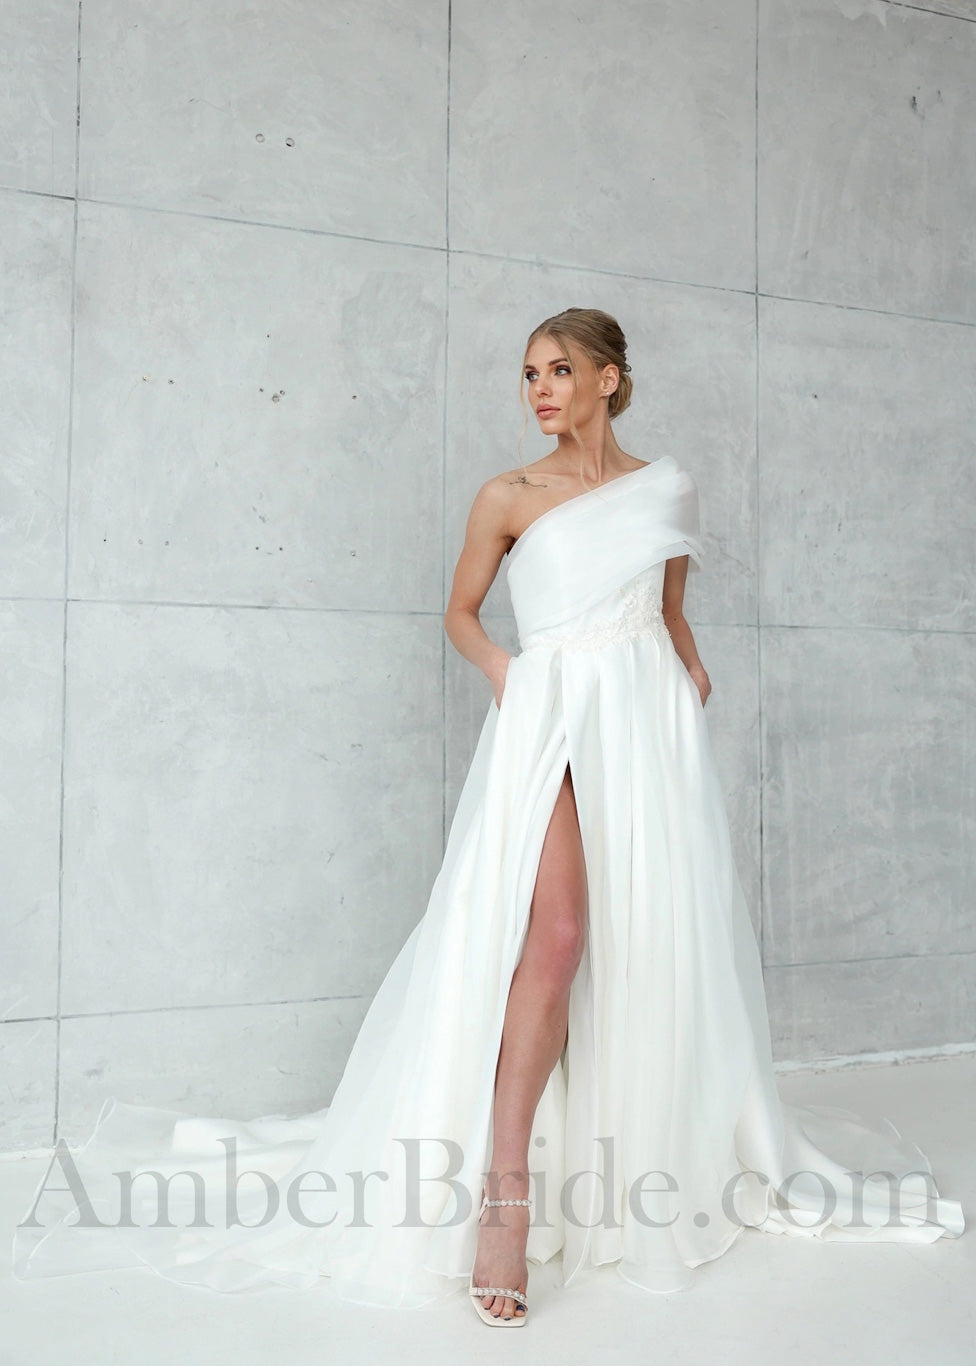 Exclusive Organza A Line Wedding Dress with a Bow and One Shoulder Design